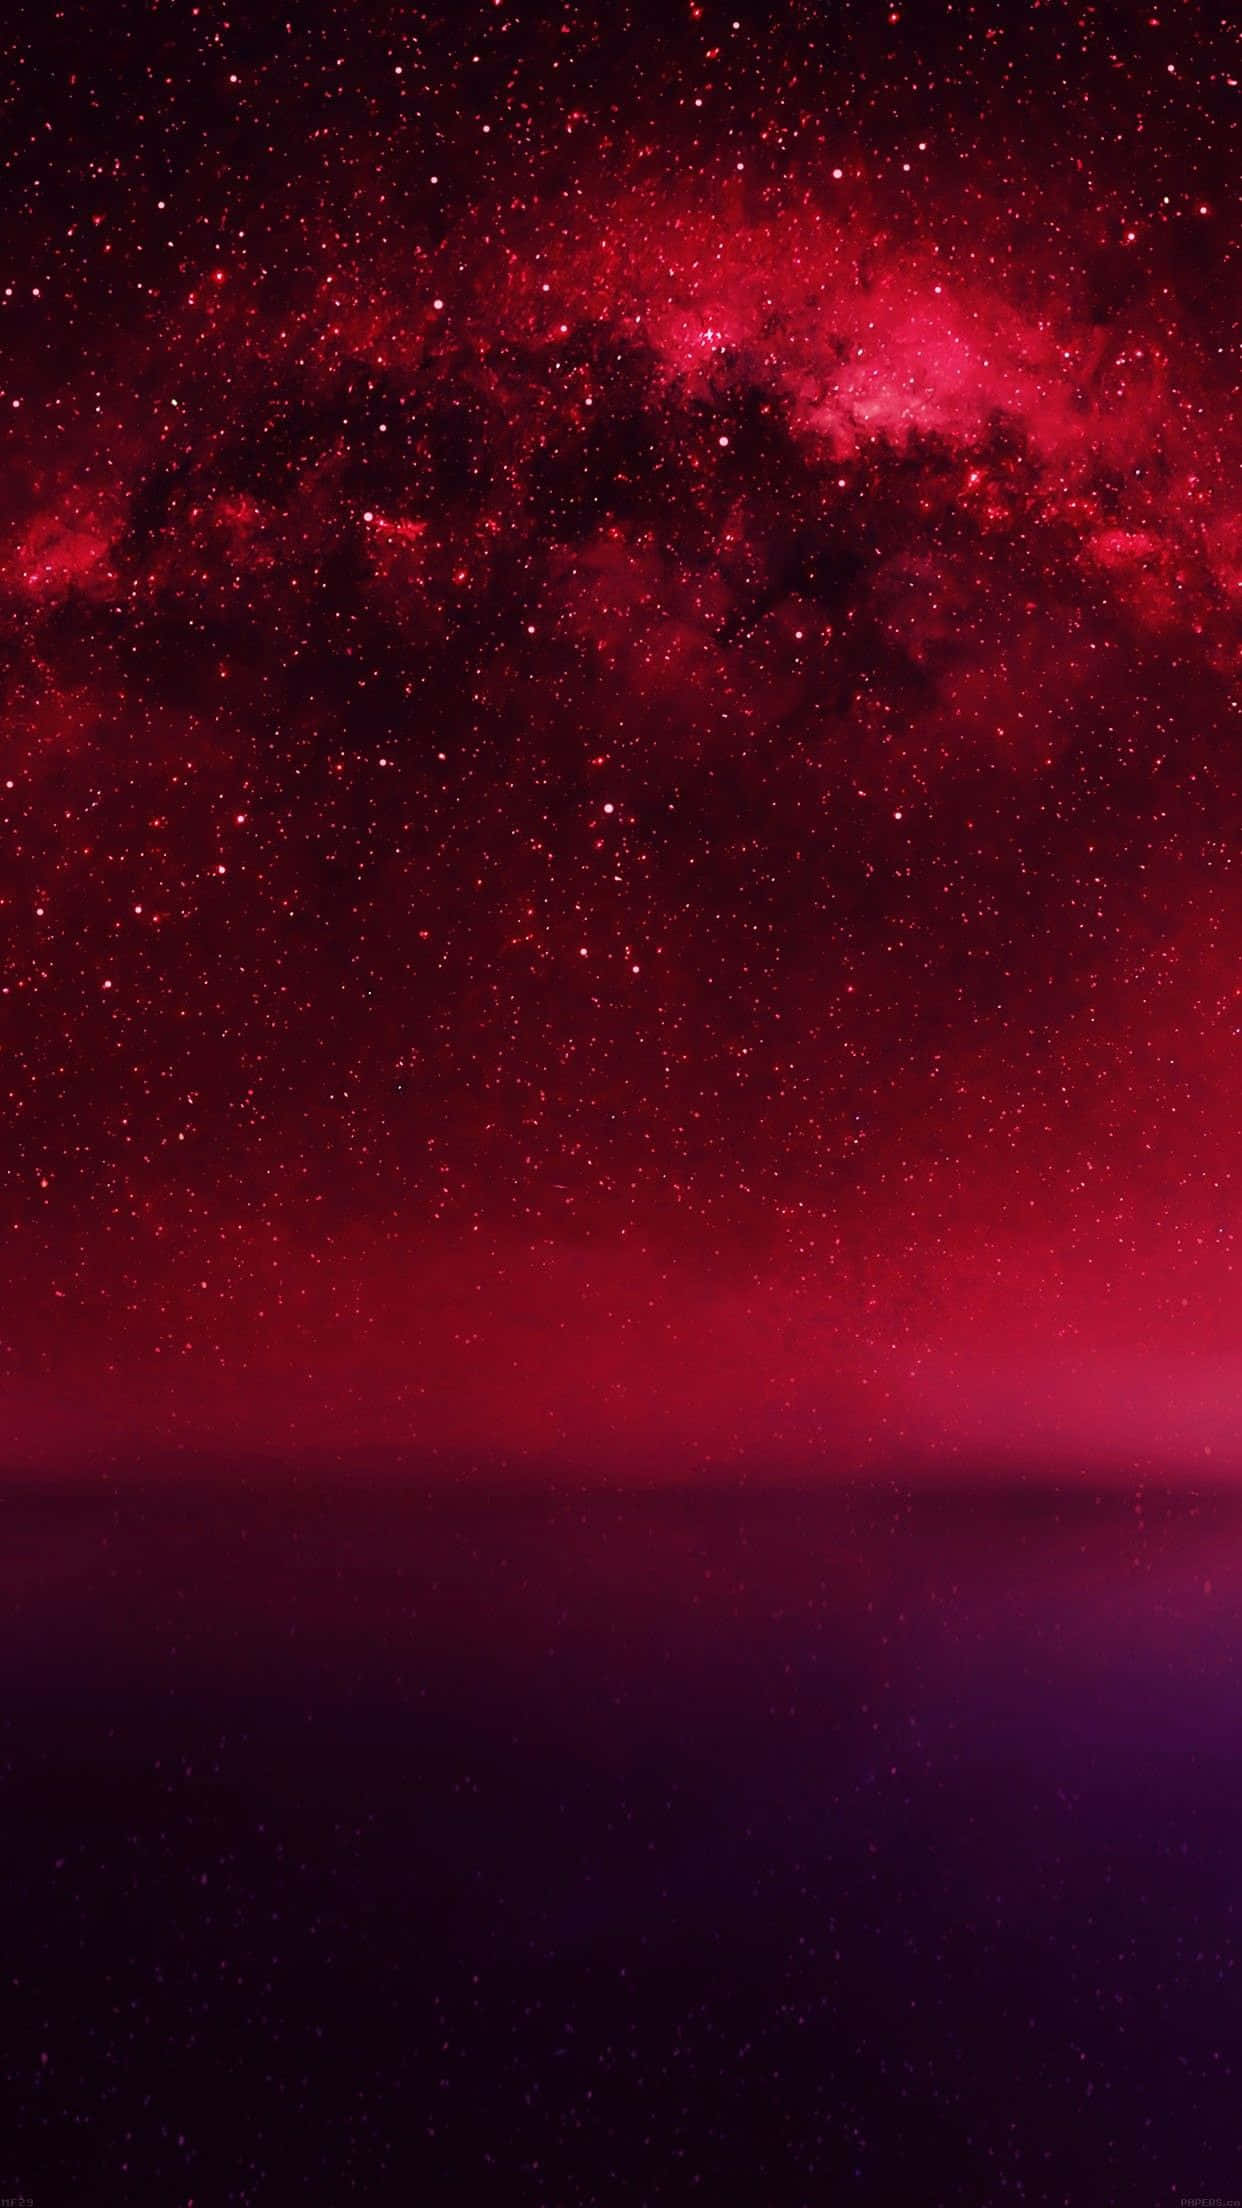 A Red And Purple Galaxy With Stars And Milky